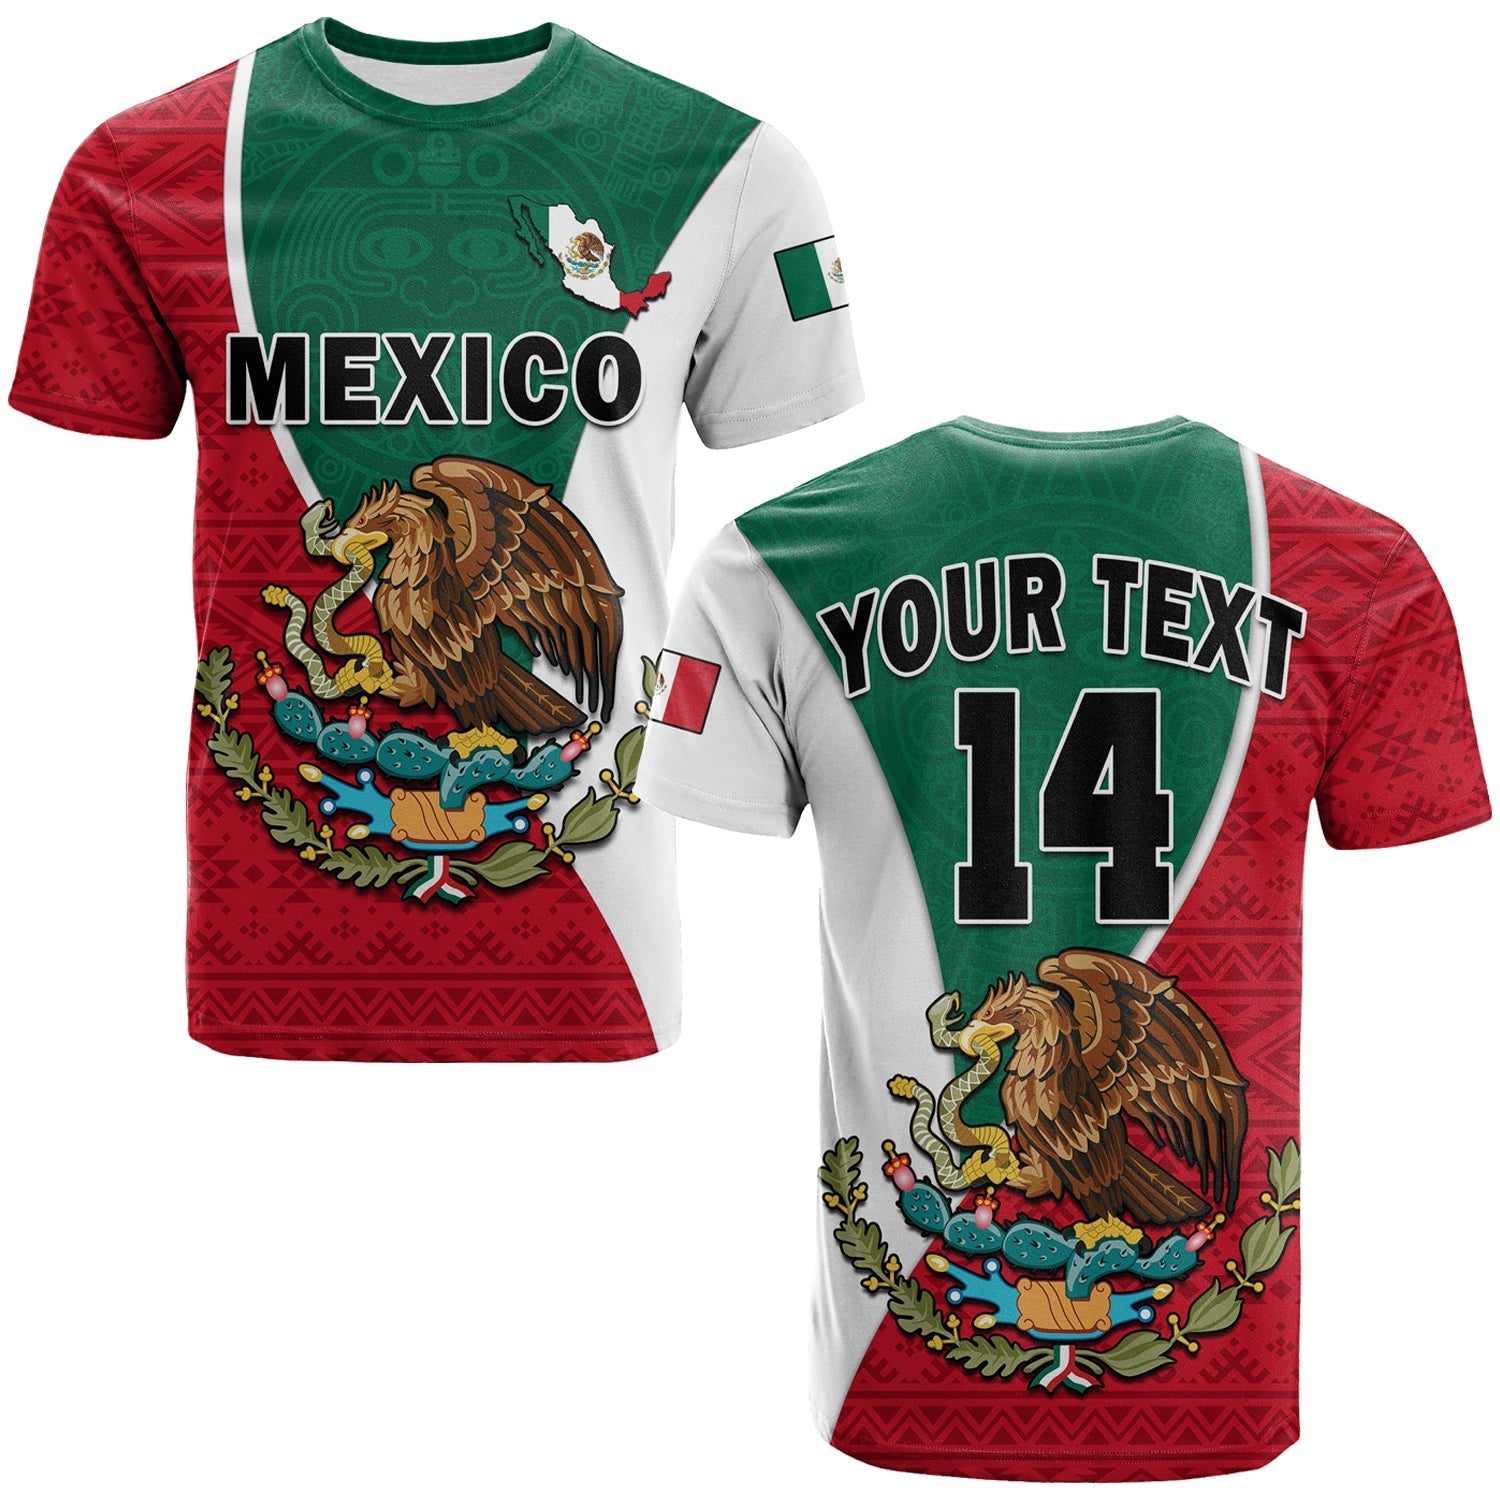 custom-text-and-number-mexico-t-shirt-mexican-aztec-pattern